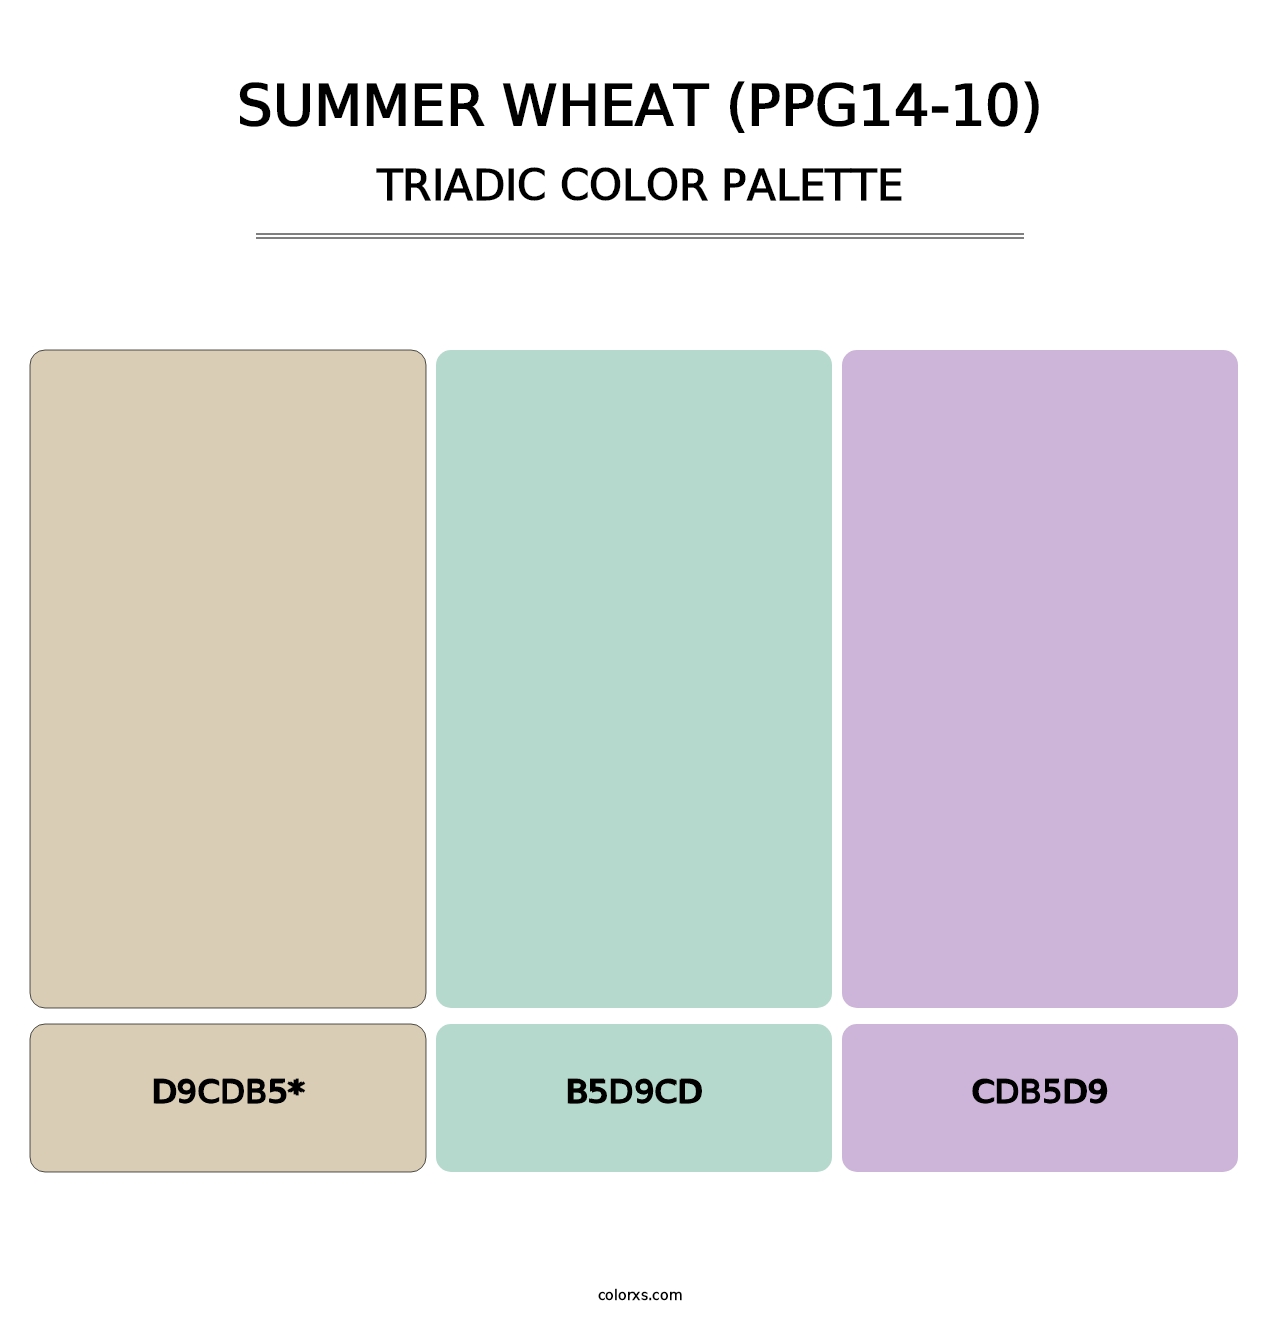 Summer Wheat (PPG14-10) - Triadic Color Palette